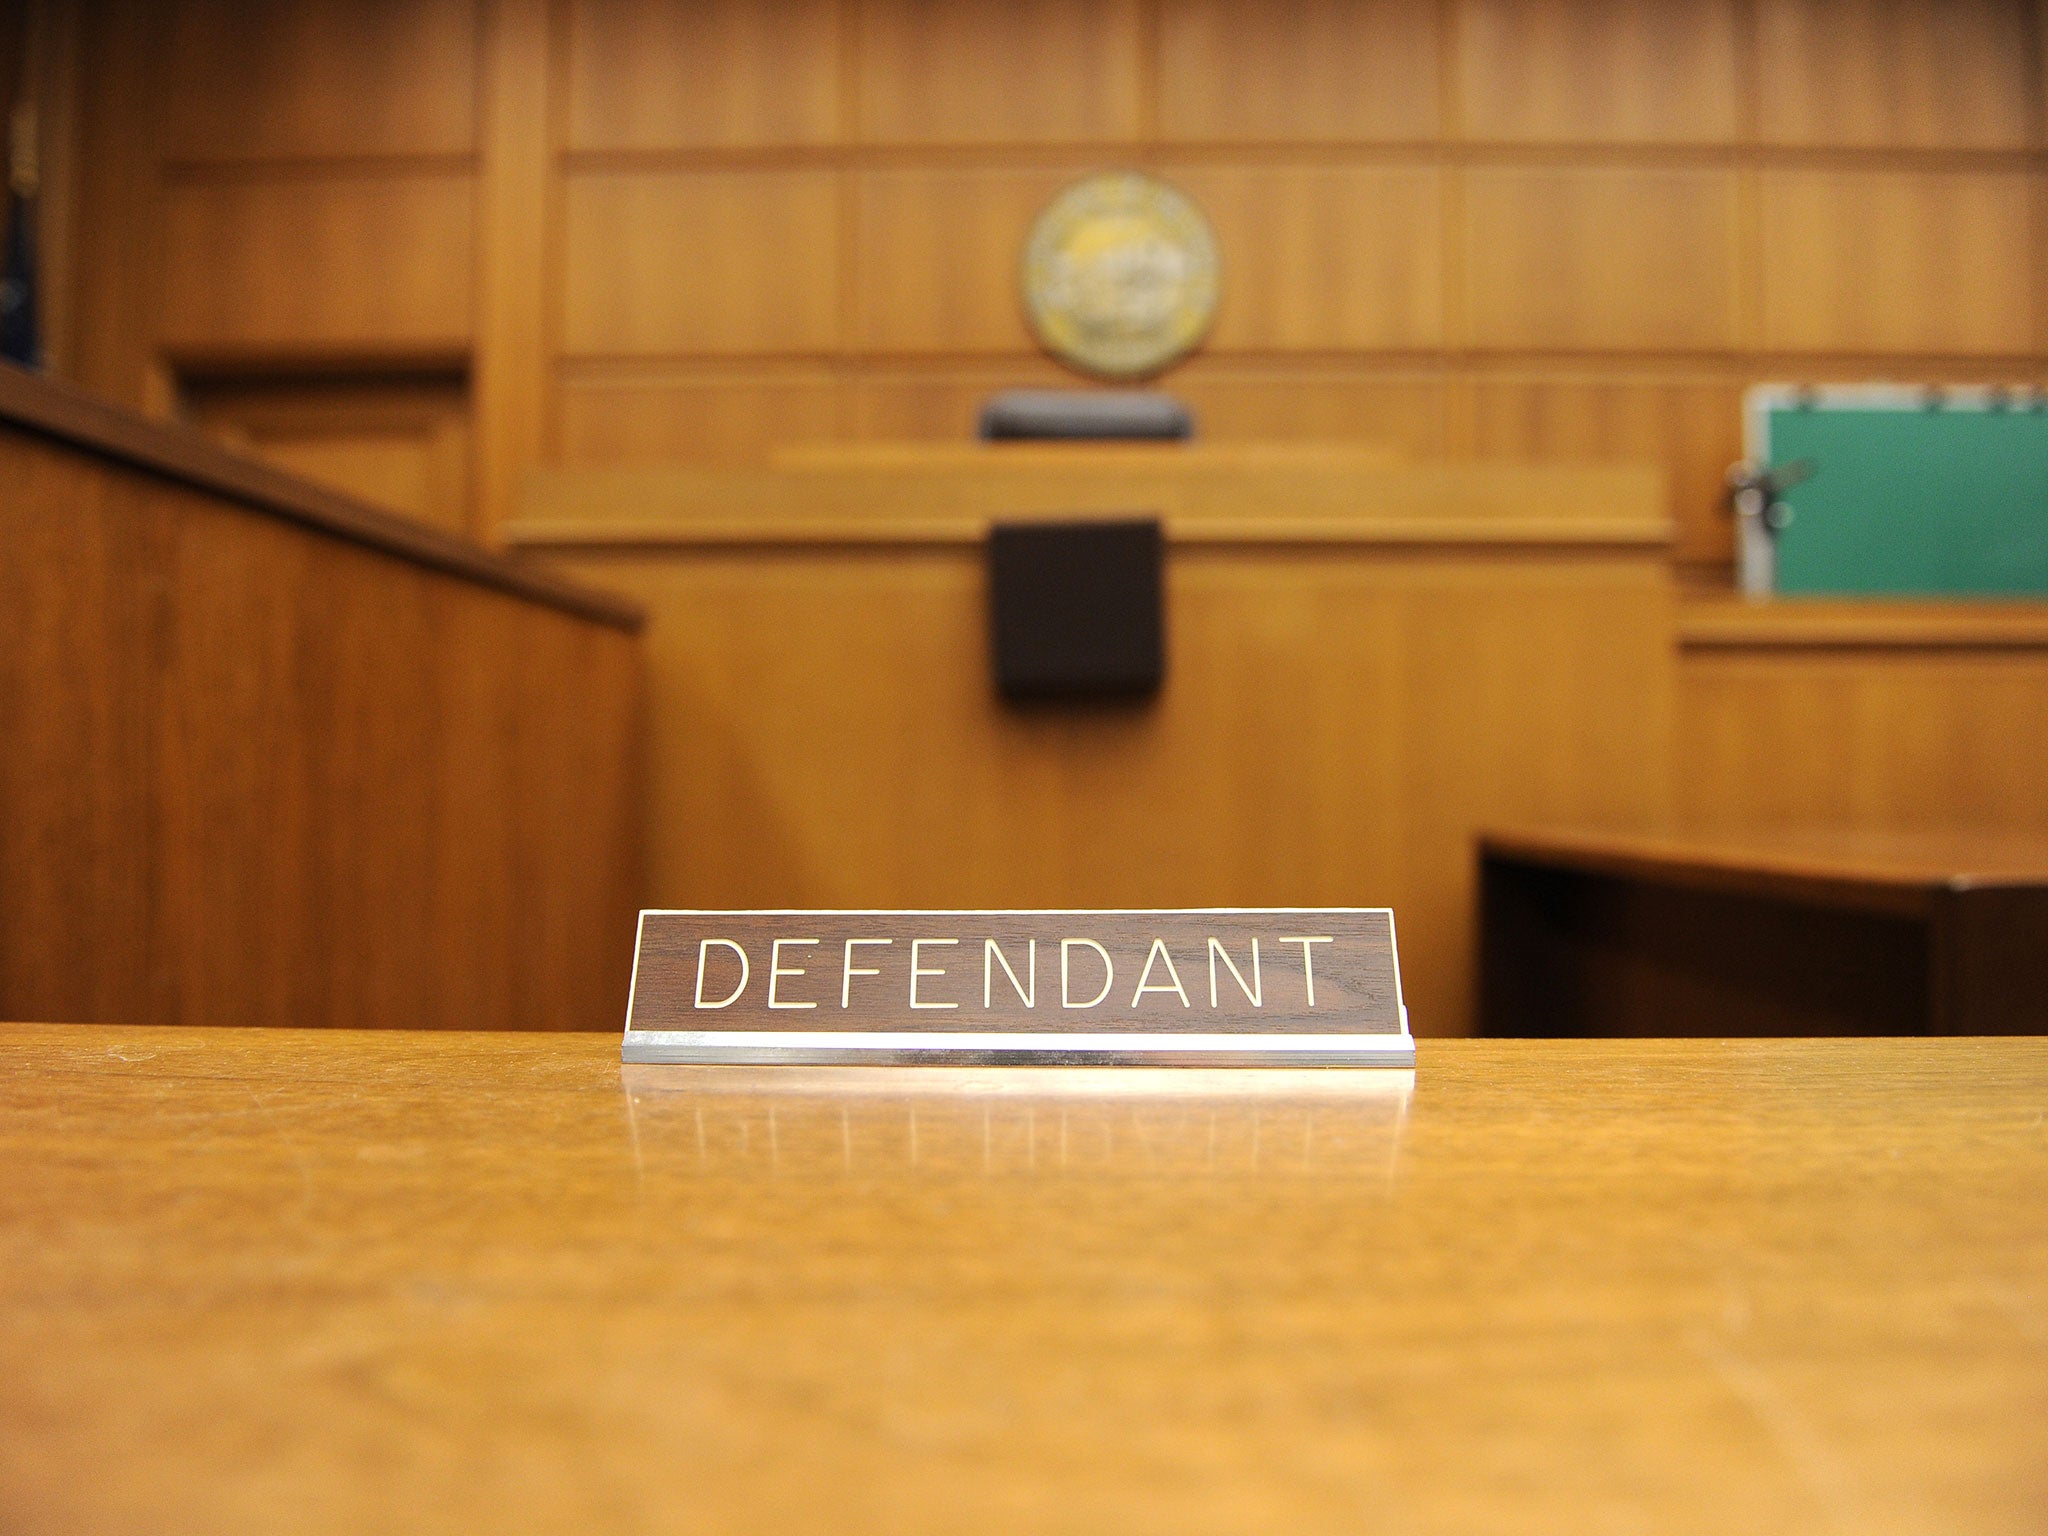 Guilty pleas could be made without incurring the cost of getting the defendant in front of a judge